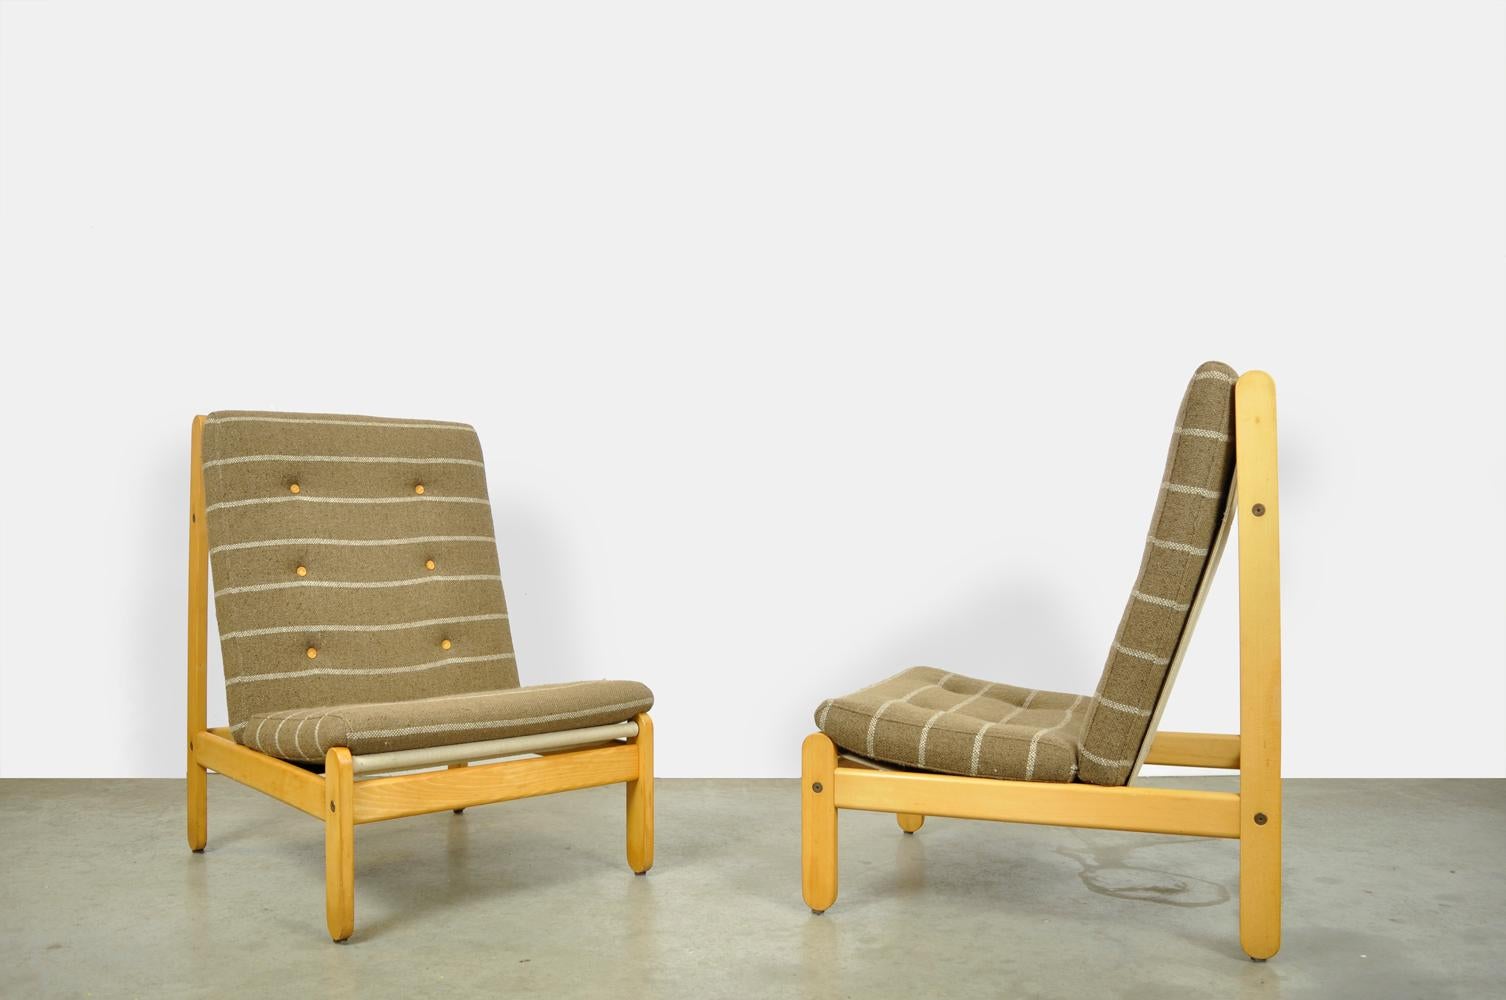 Special oak lounge armchairs designed by the Dane Bernt Petersen and produced by Schiang Furniture, 1960s.

The armchairs have an oak frame with a canvas seat in between. There are two padded brown woolen cushions on the canvas seat. Nice detail